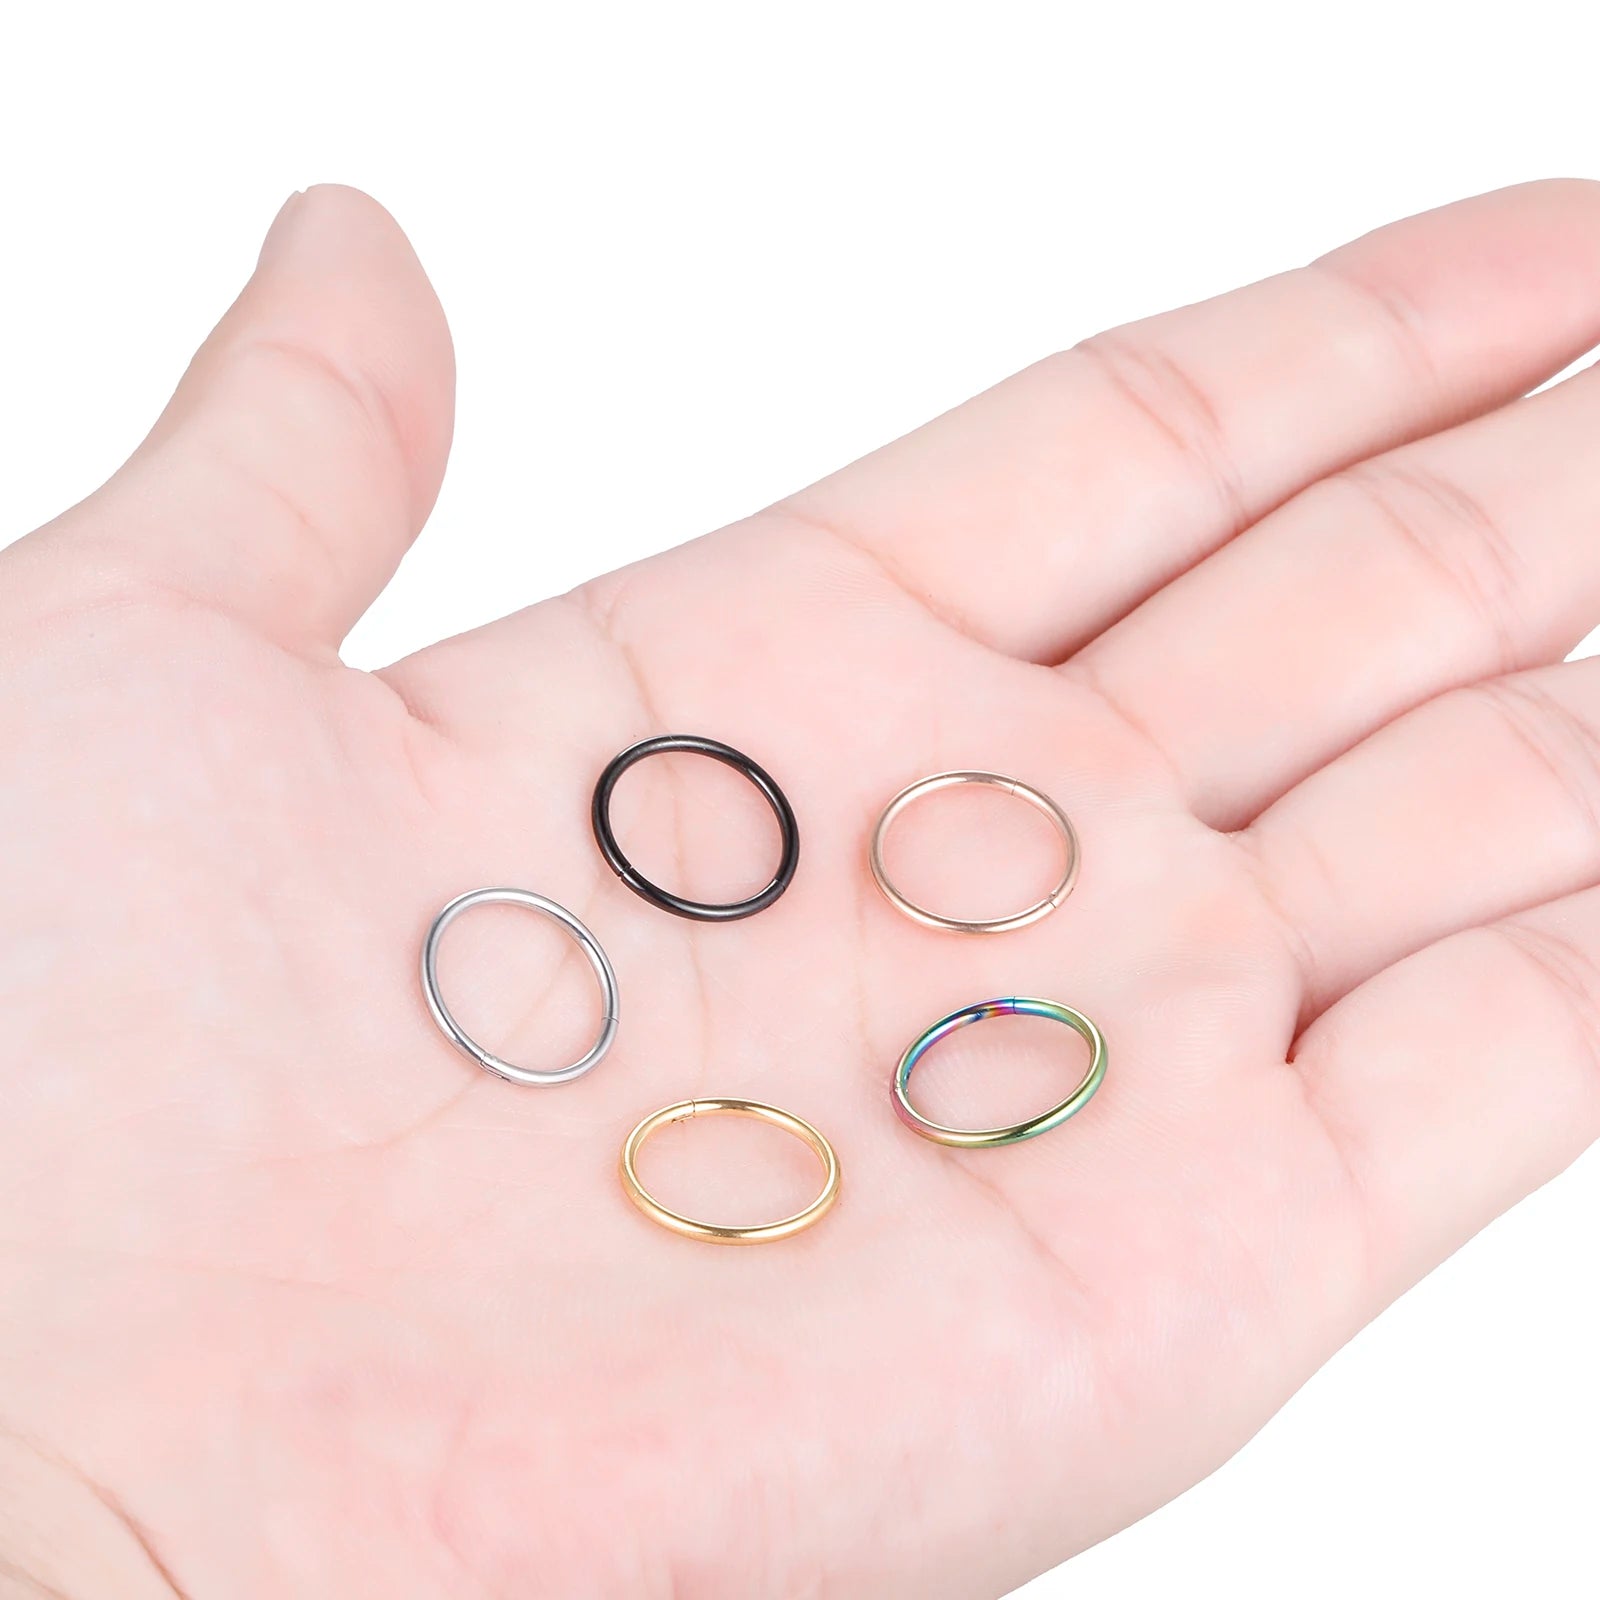 Piercing Surgical Steel Hinged Nose Ring - Madeinsea©